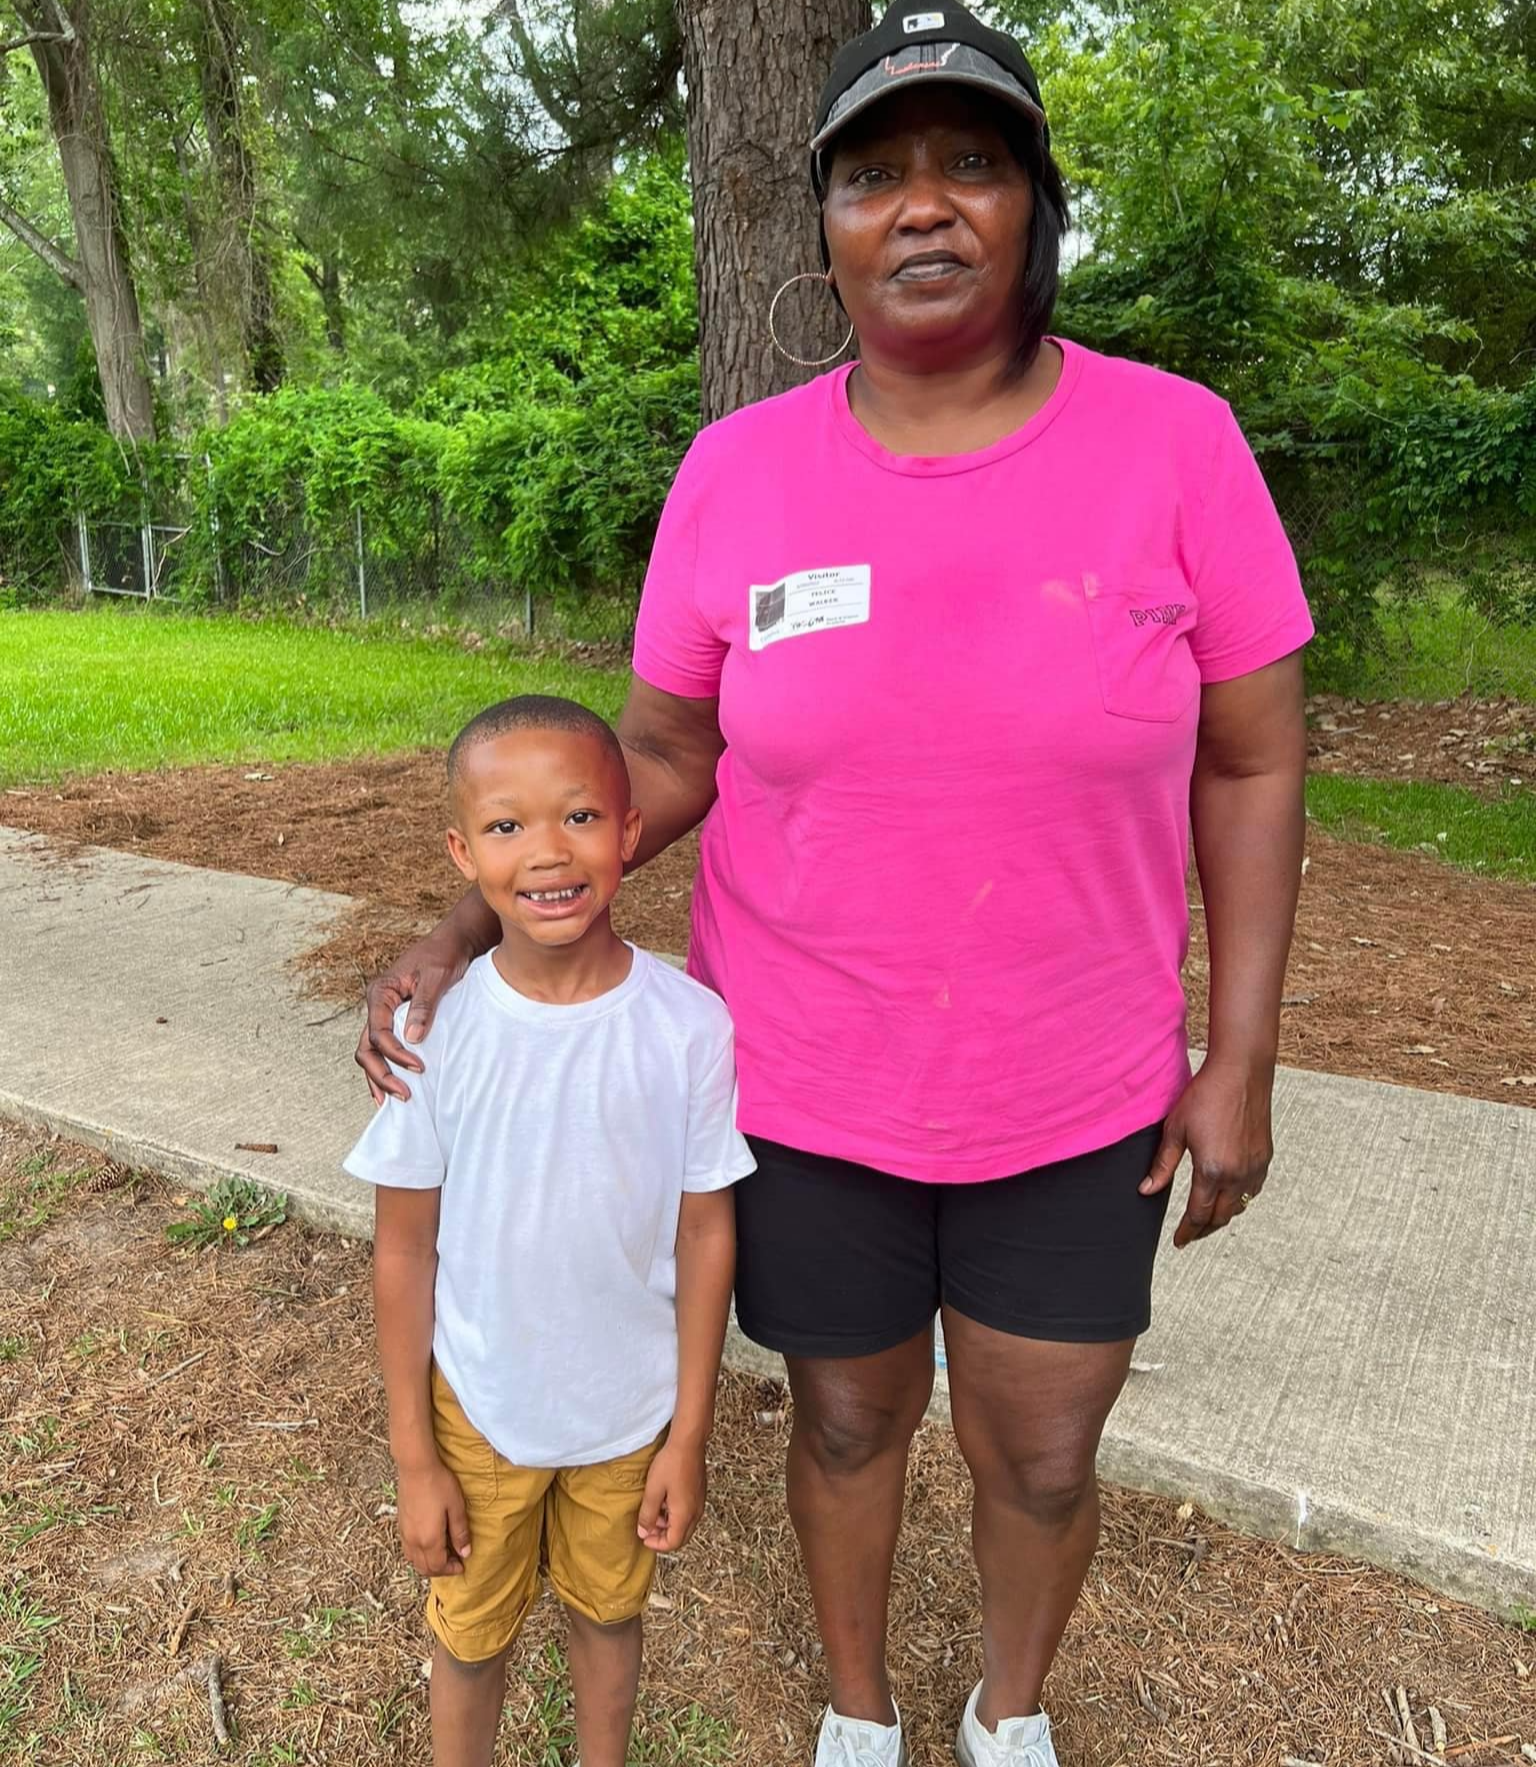 Student and grandmother together on field day.